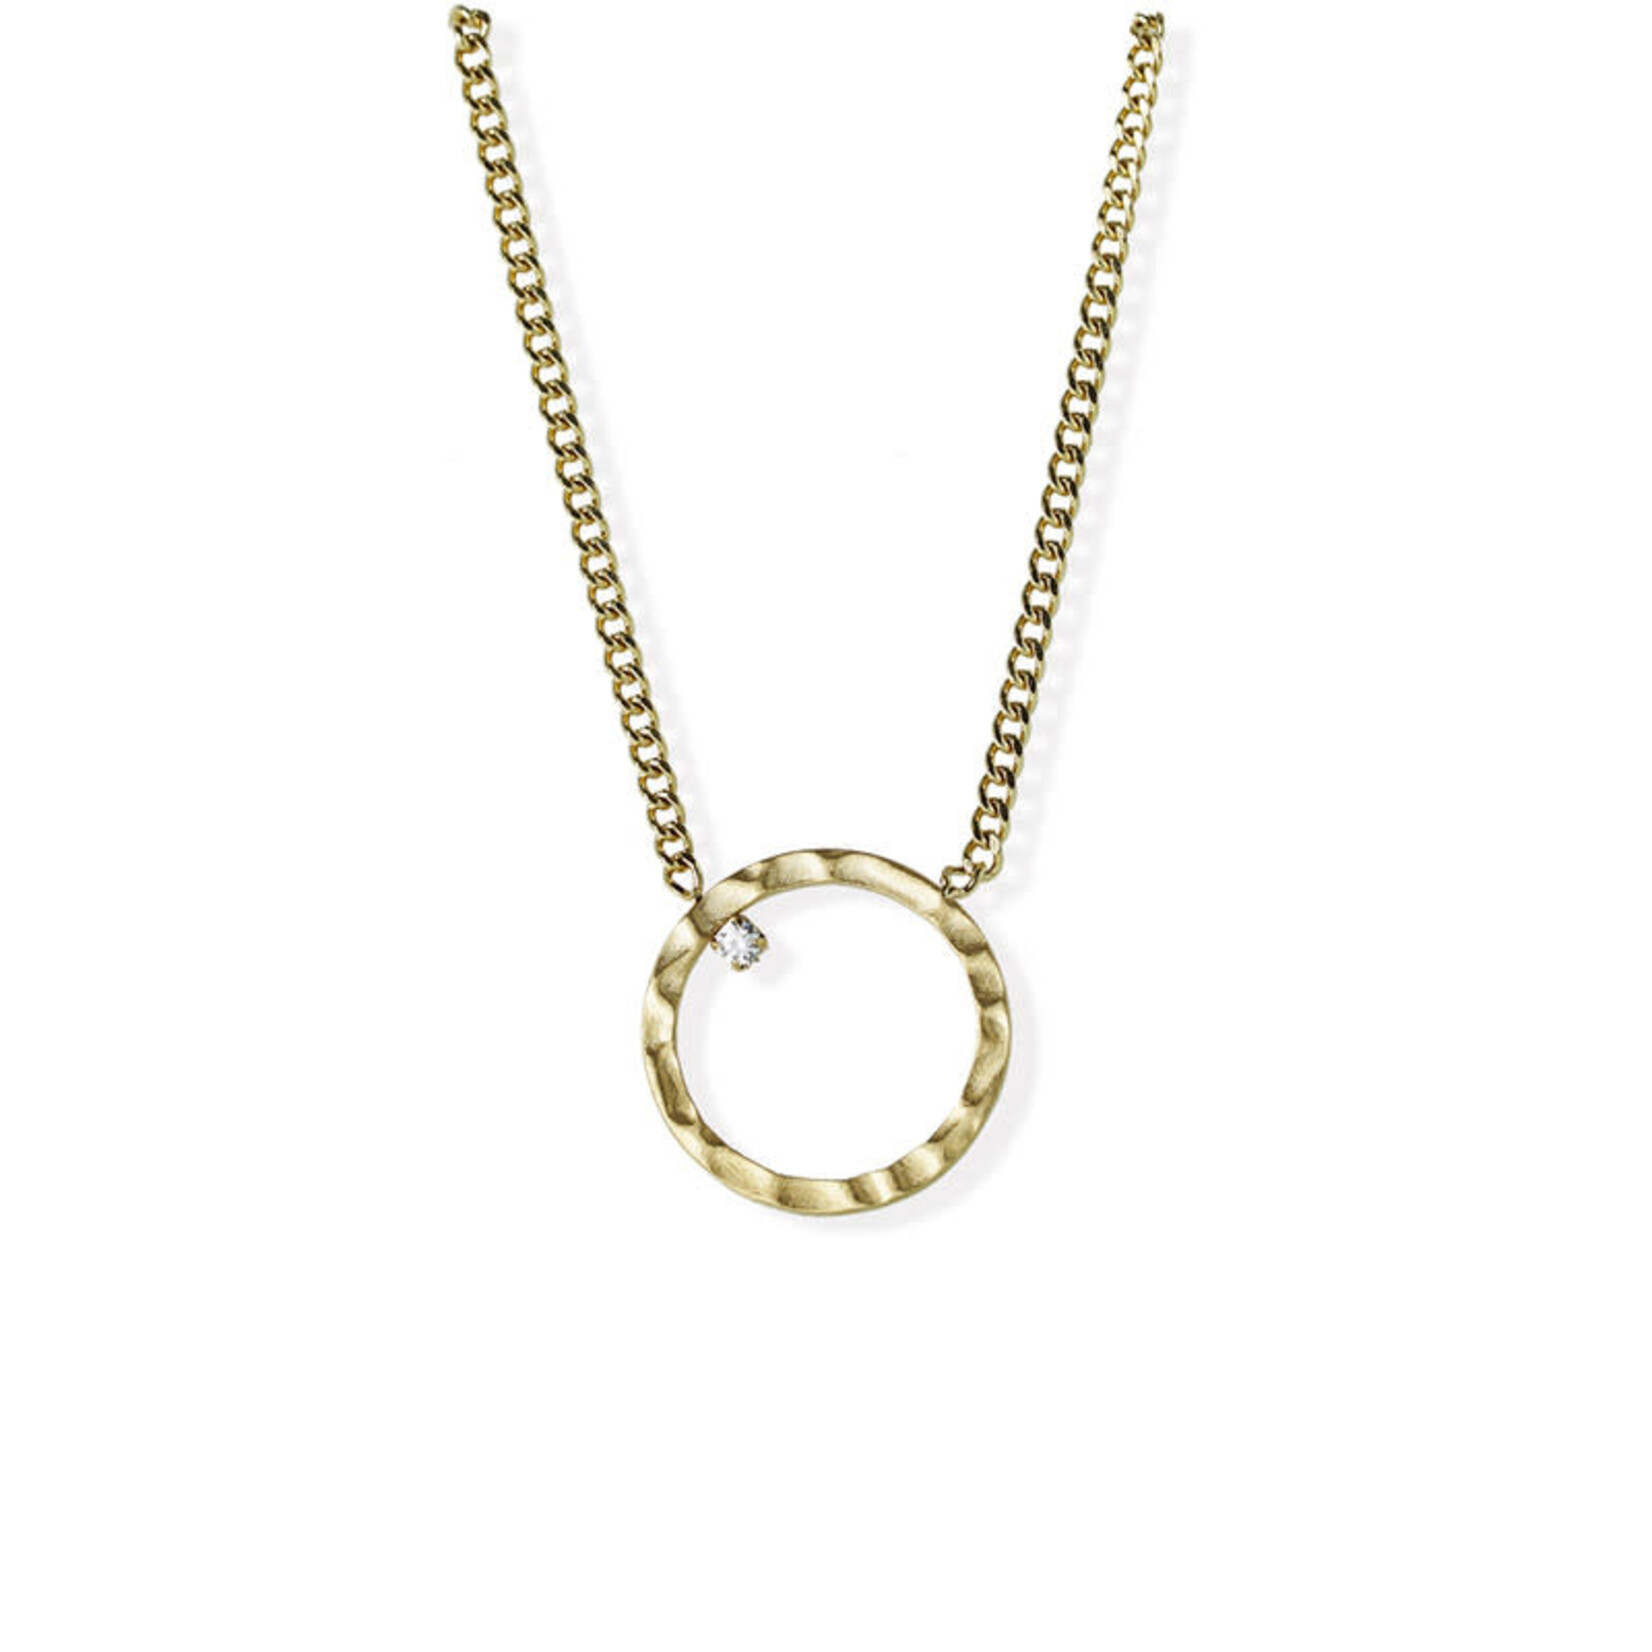 FAB Accessories Hammered Circle Necklace -